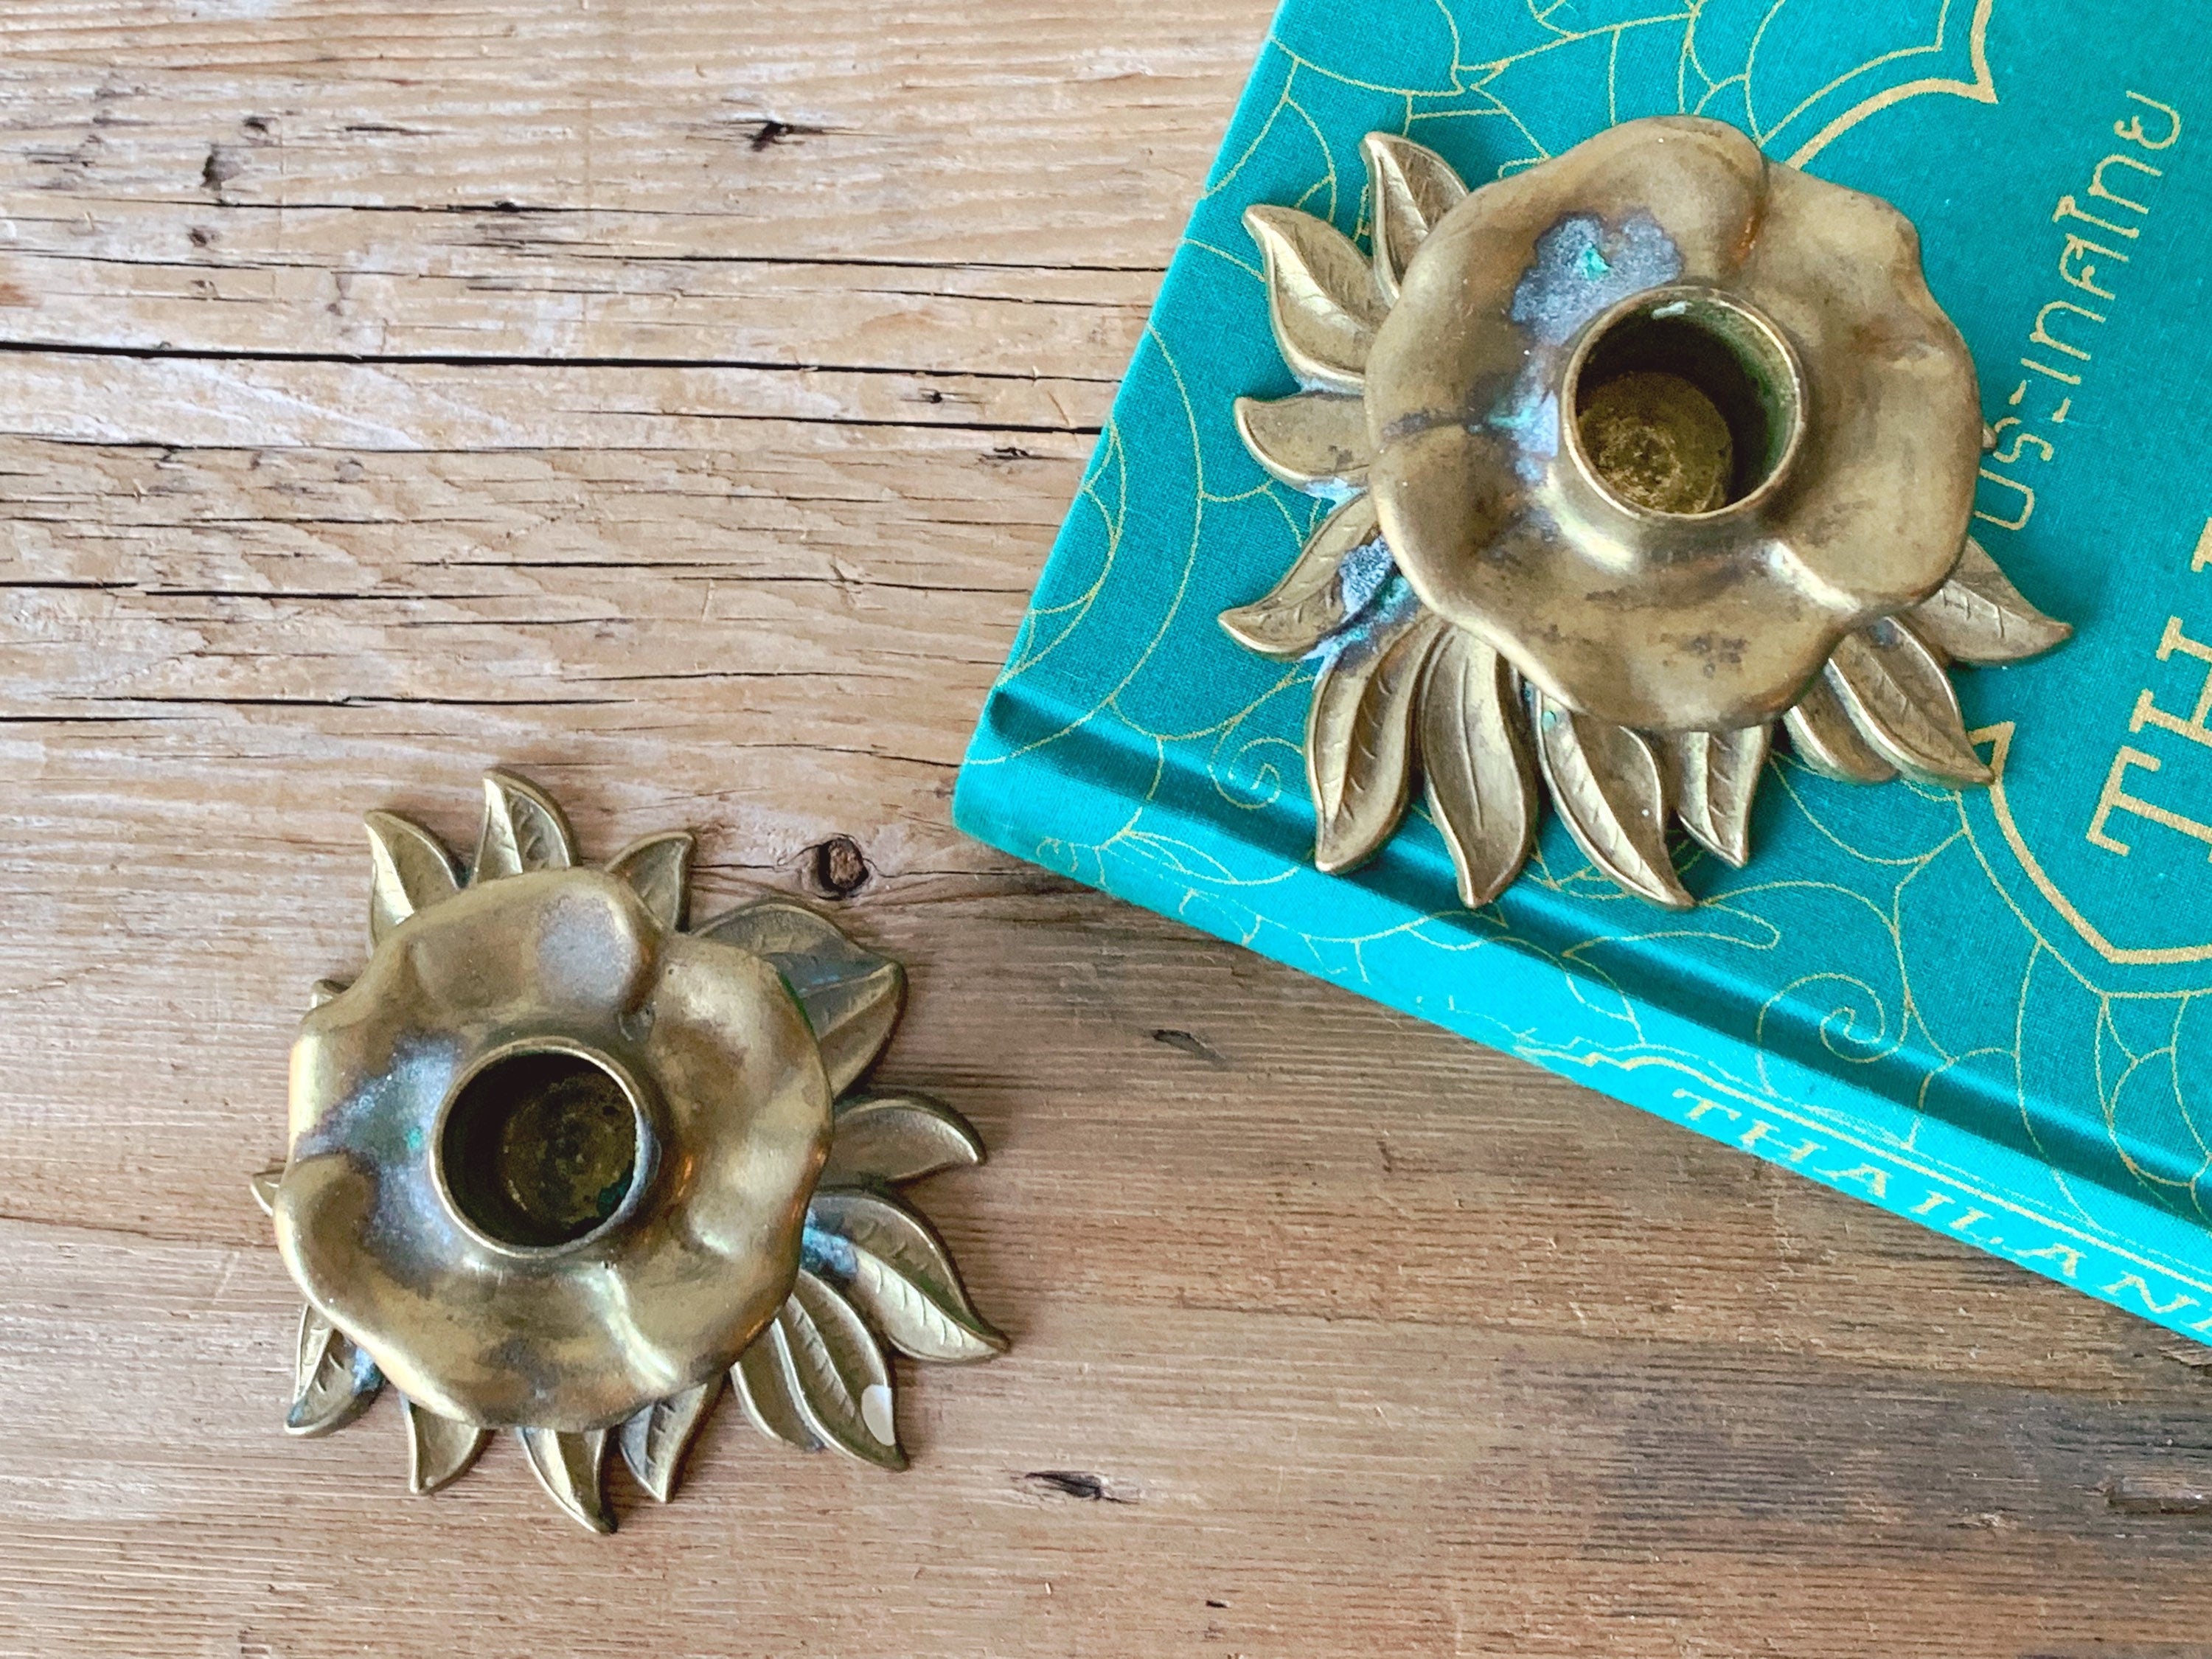 Pair of Vintage Brass Taper Candle Holders by Gilde Handwerk | Floral Candlesticks Christmas Home Decor Table Setting | Gift for Her